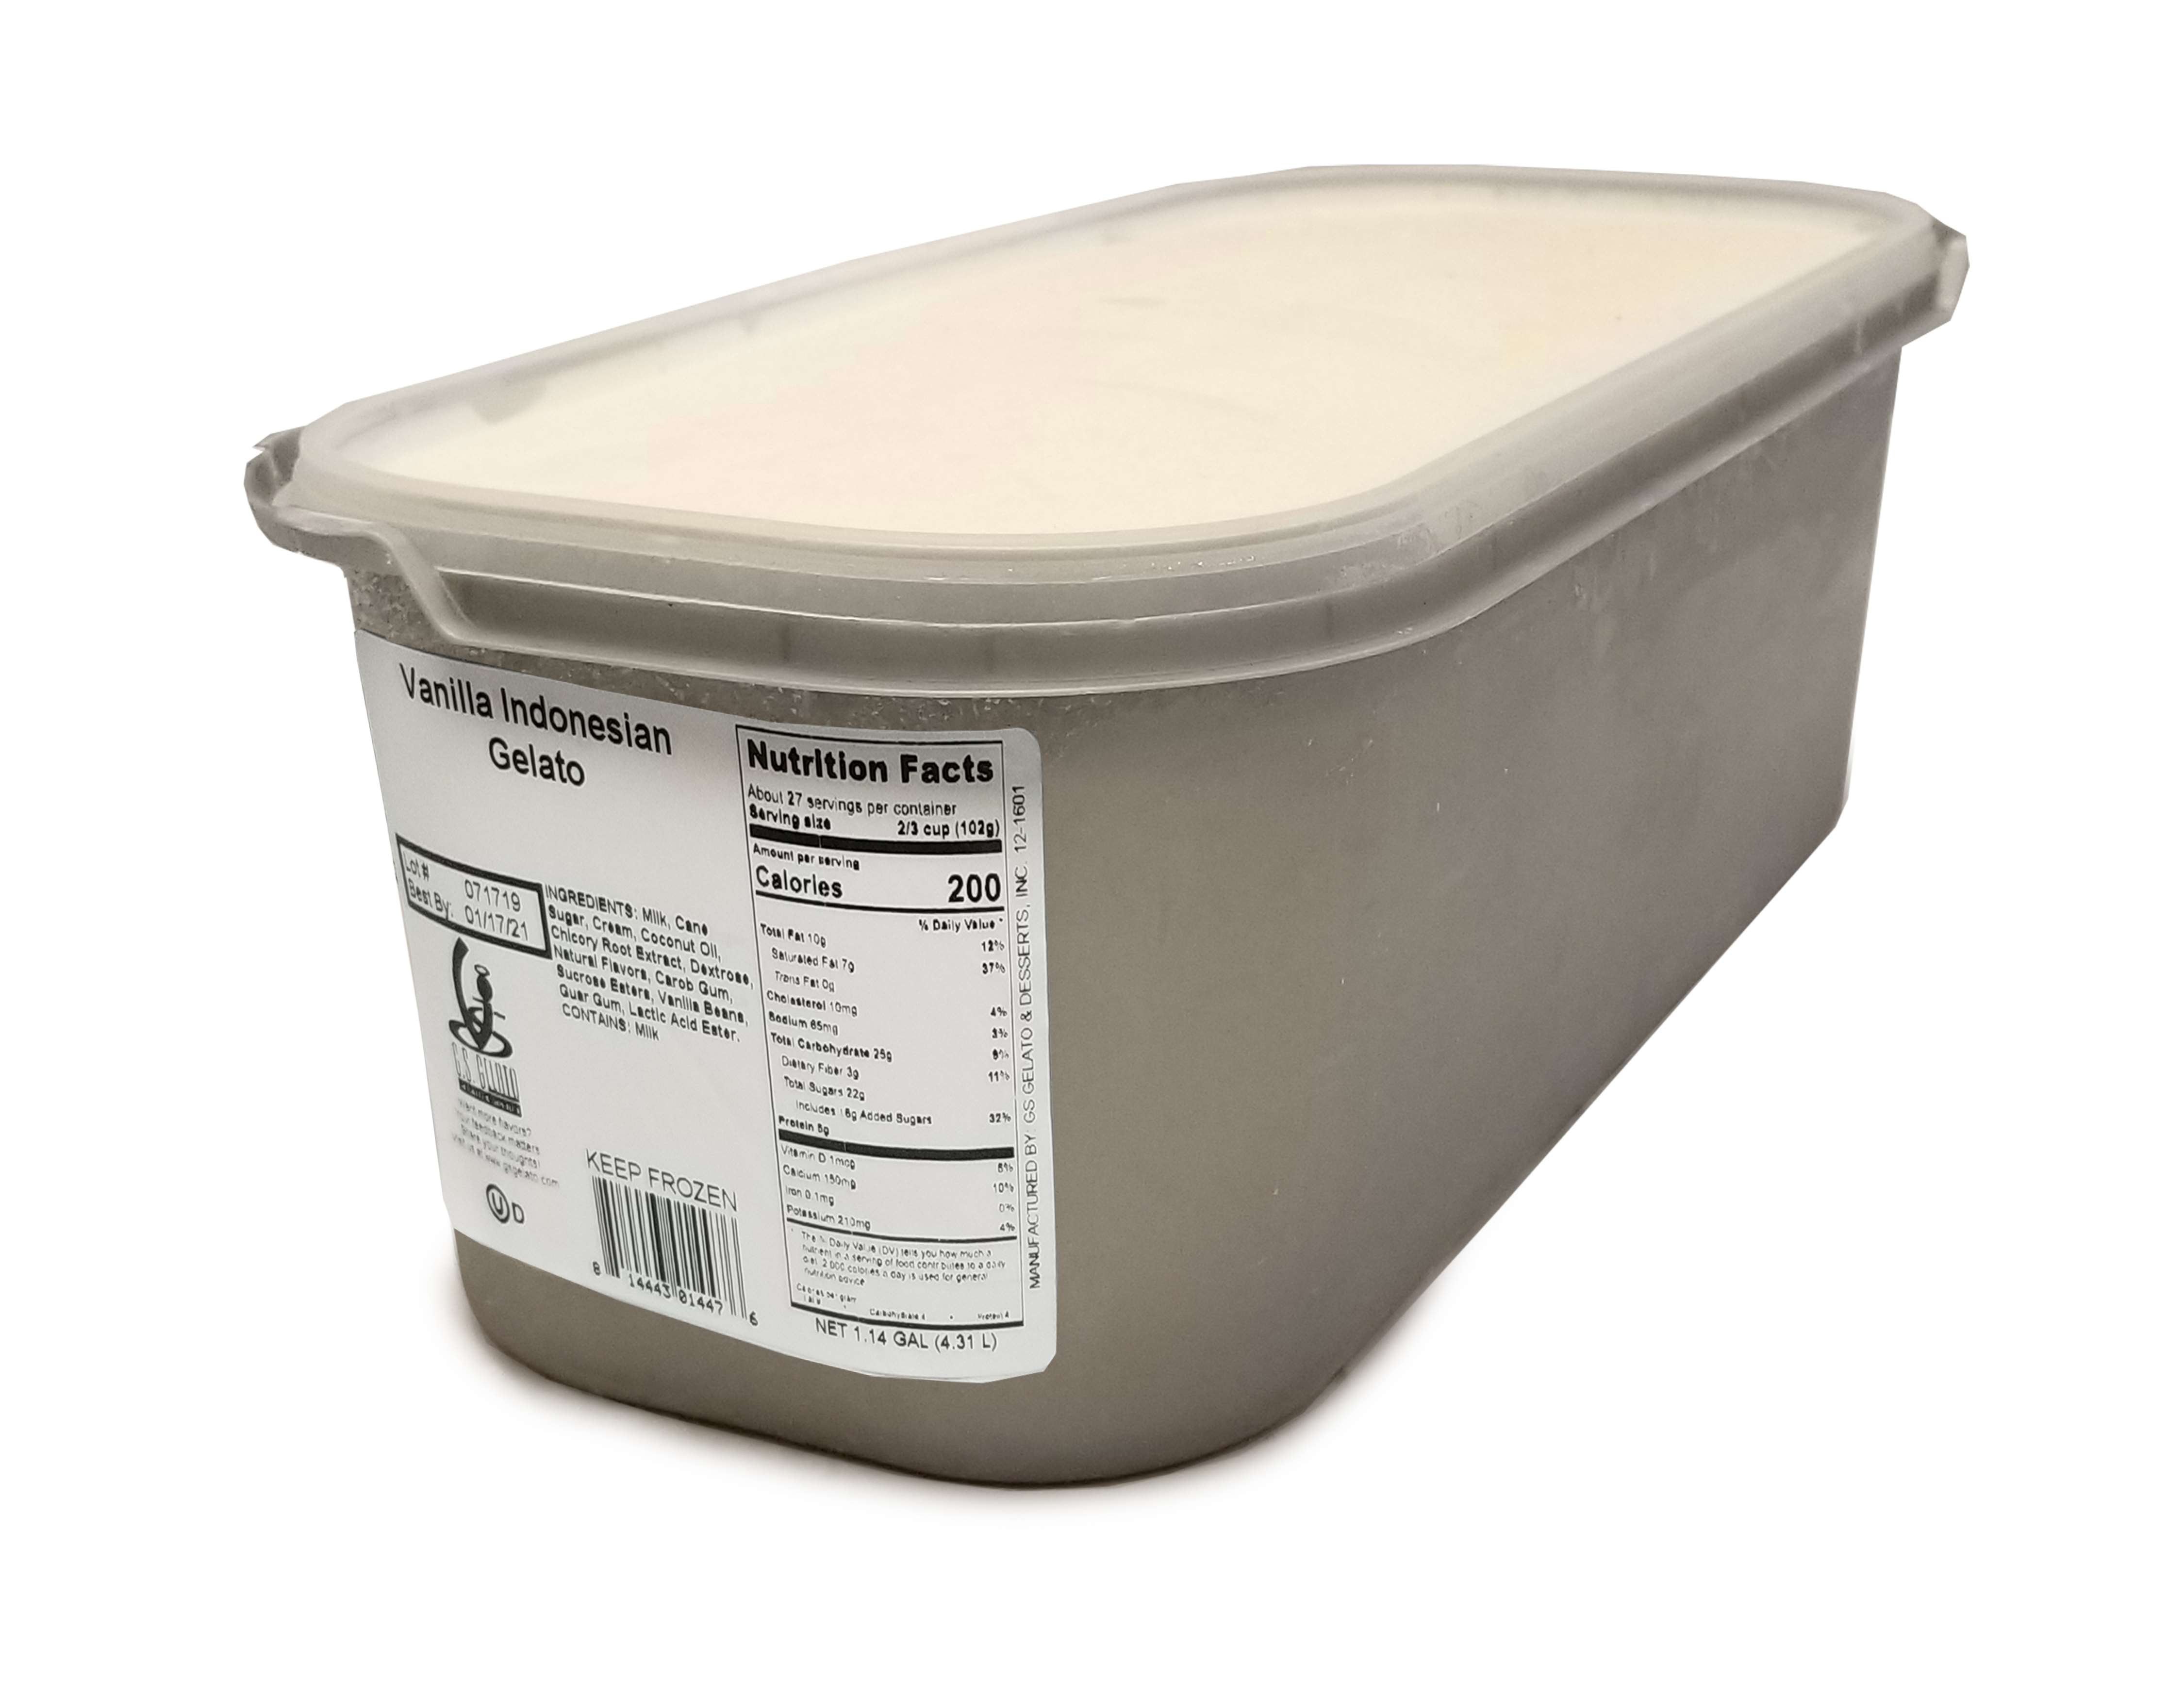 2 1/2 Gallon Plastic Ice Cream Tubs (Without Lids) - 10 Count